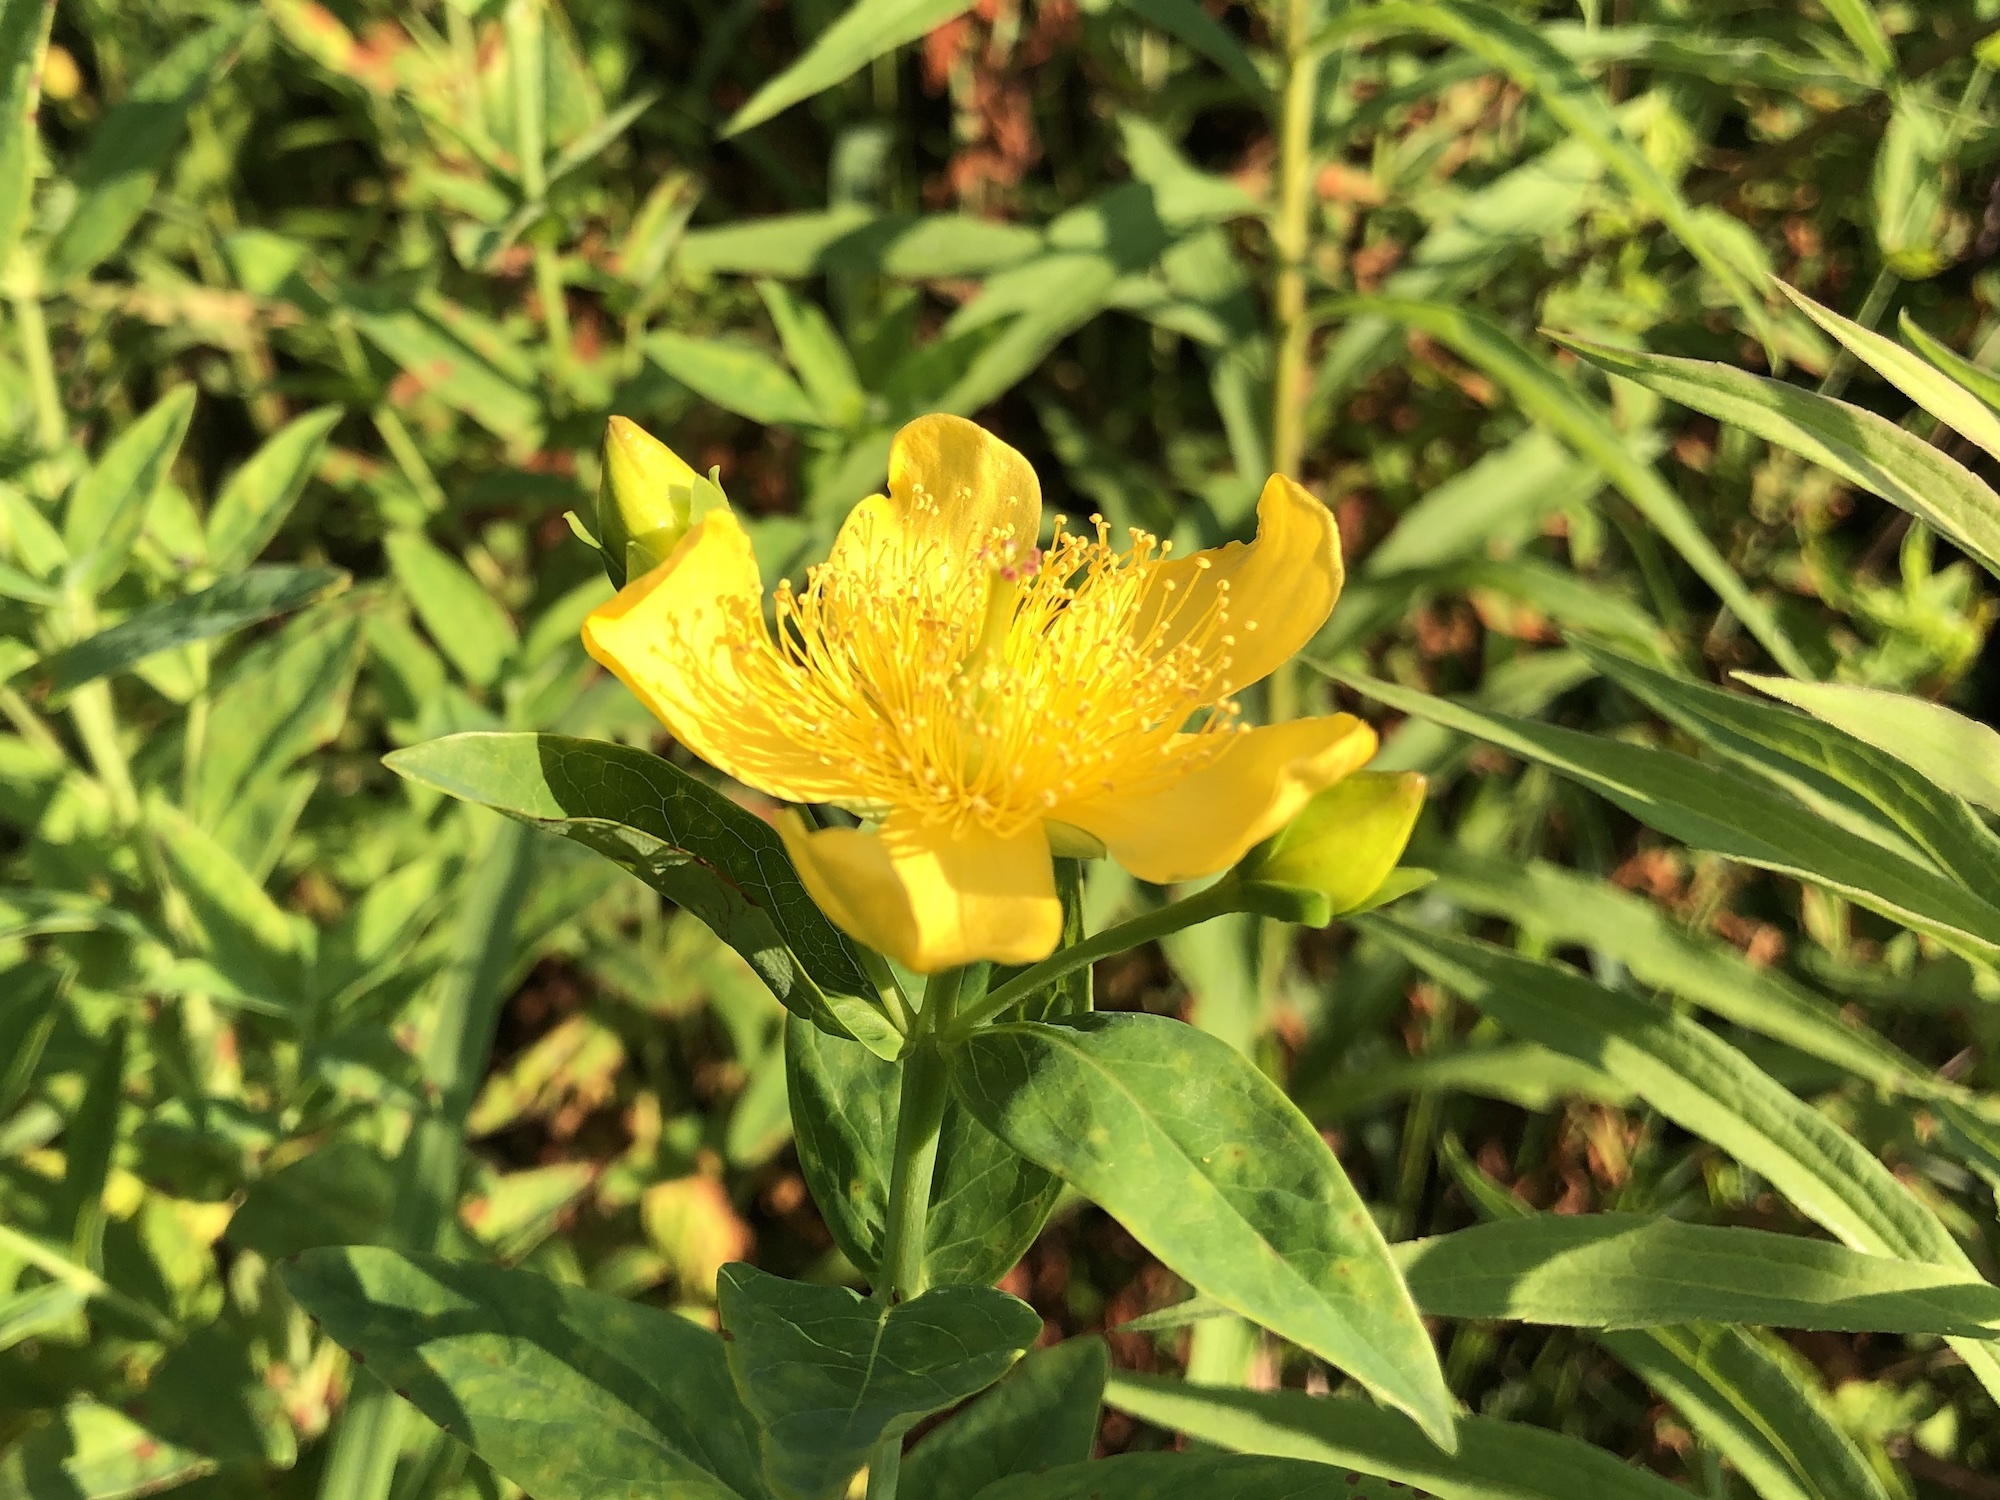 Great St. John's wort on bank of Marion Dunn Pond on July 7, 2019.